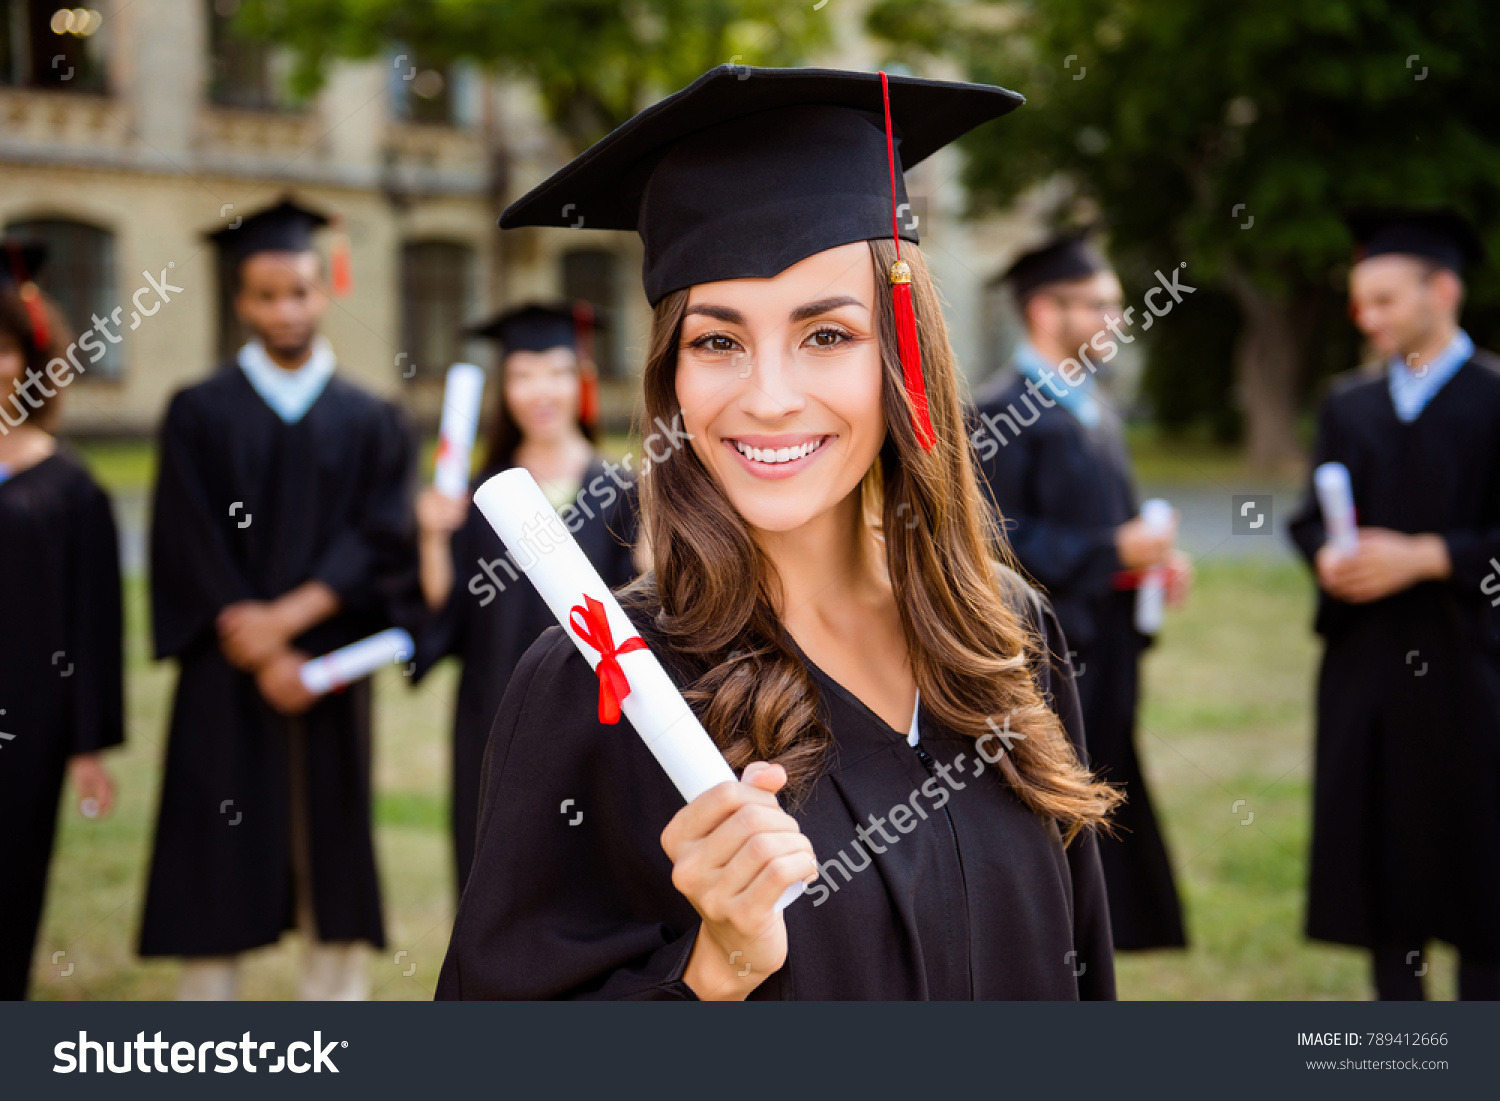 Happy cute brunette caucasian grad girl is smiling, blurred class mates are behind. She is in a black mortar board, with red tassel, in gown, with nice brown curly hair, diploma in hand #789412666